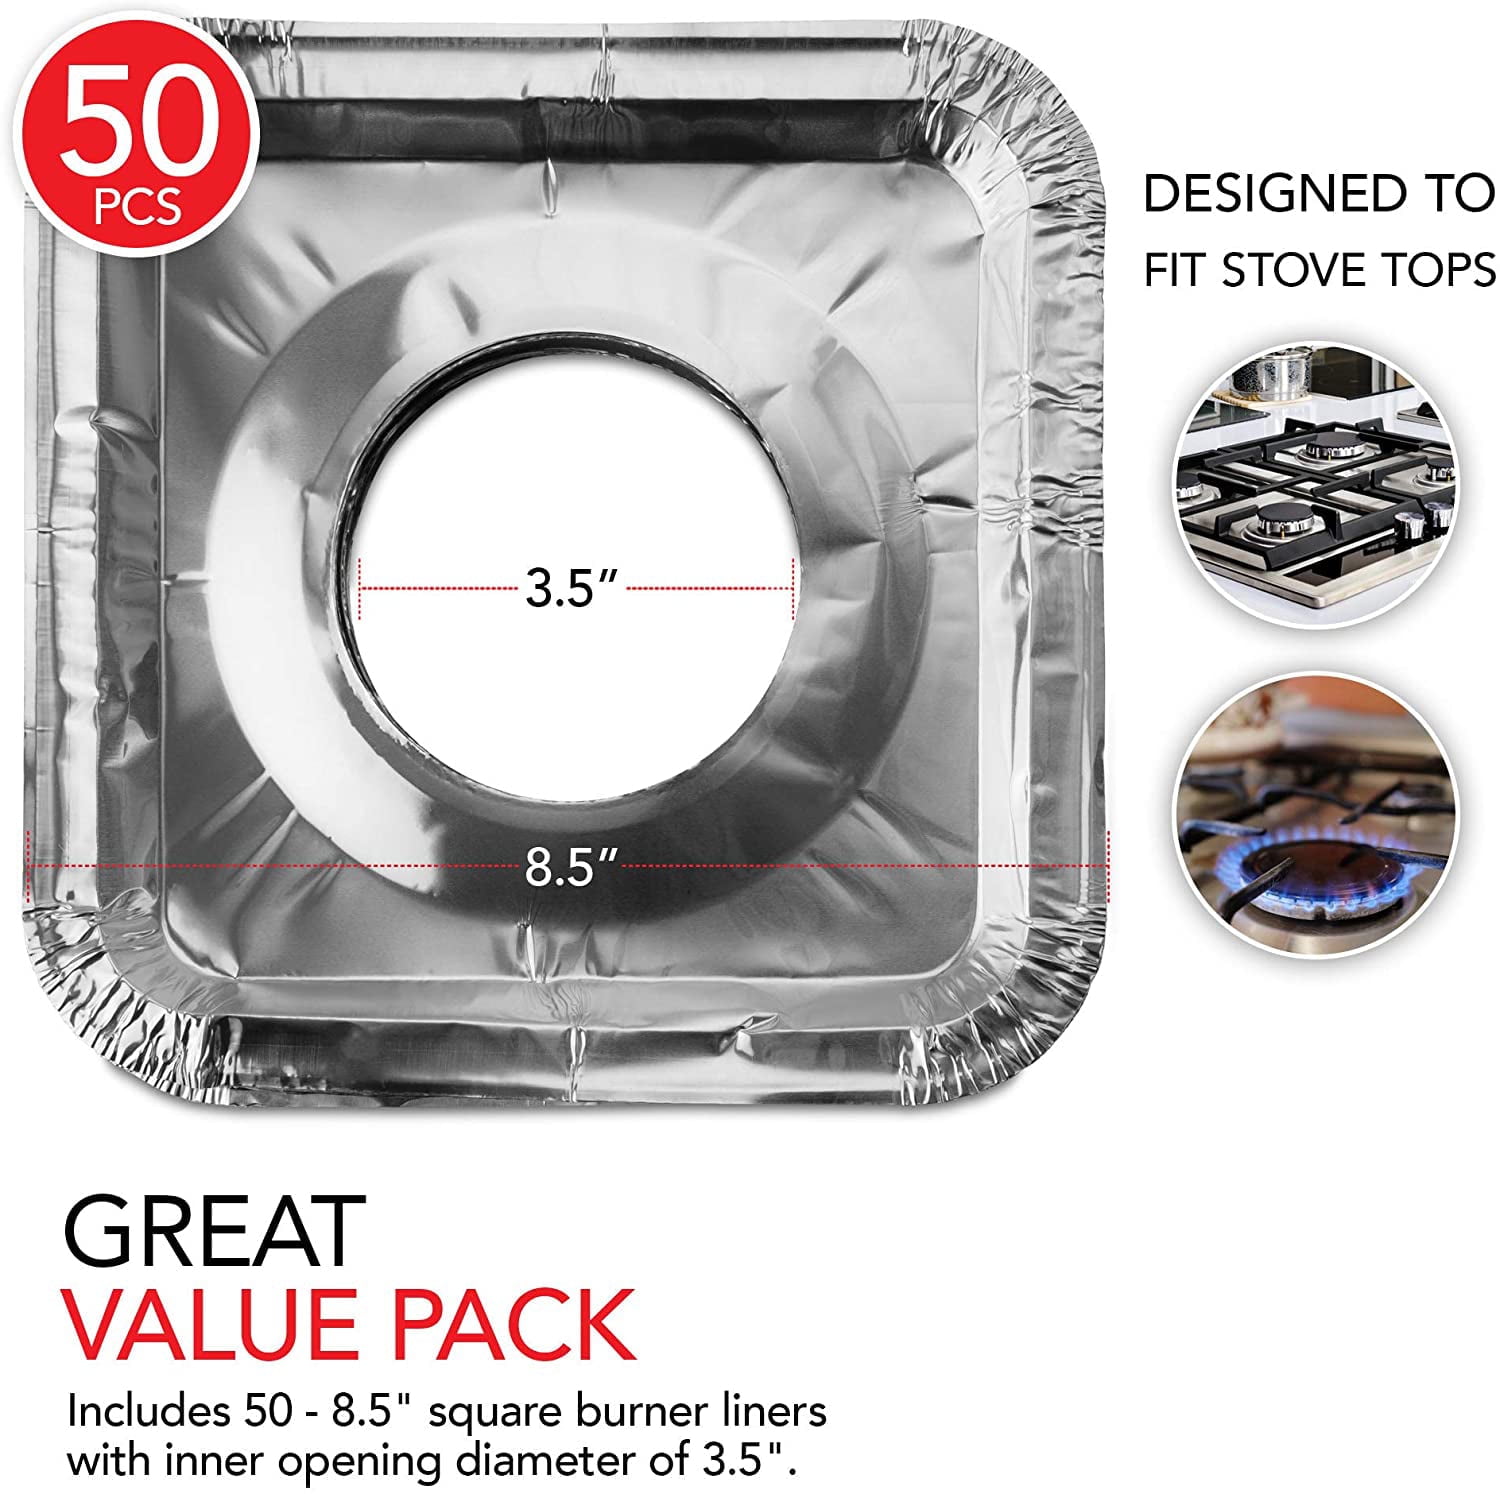 DCS Deals Aluminum Foil Square GAS Stove Burner Covers Pack of 100 Disposable Bib Liners for Kitchen GAS Range Top - Keep Your GAS